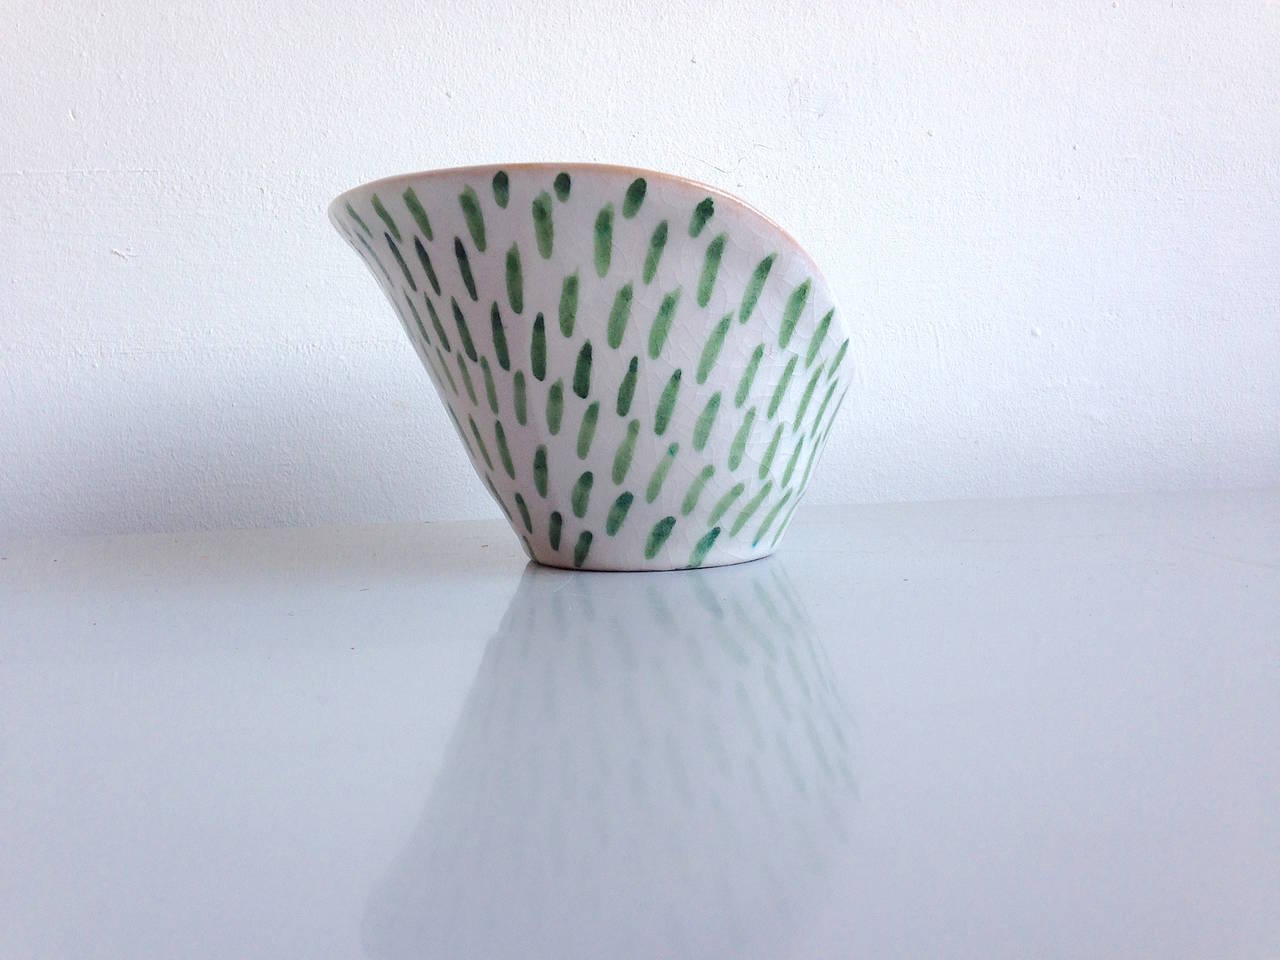 Guido Gambone

Ceramic vessel bowl by Guido Gambone. This features a graphic design in the interior with green glazes. The exterior is white with green lines. The bowl is signed with GAMBONE , ITALY the donkey mark in green.

ITEM LOCATED IN